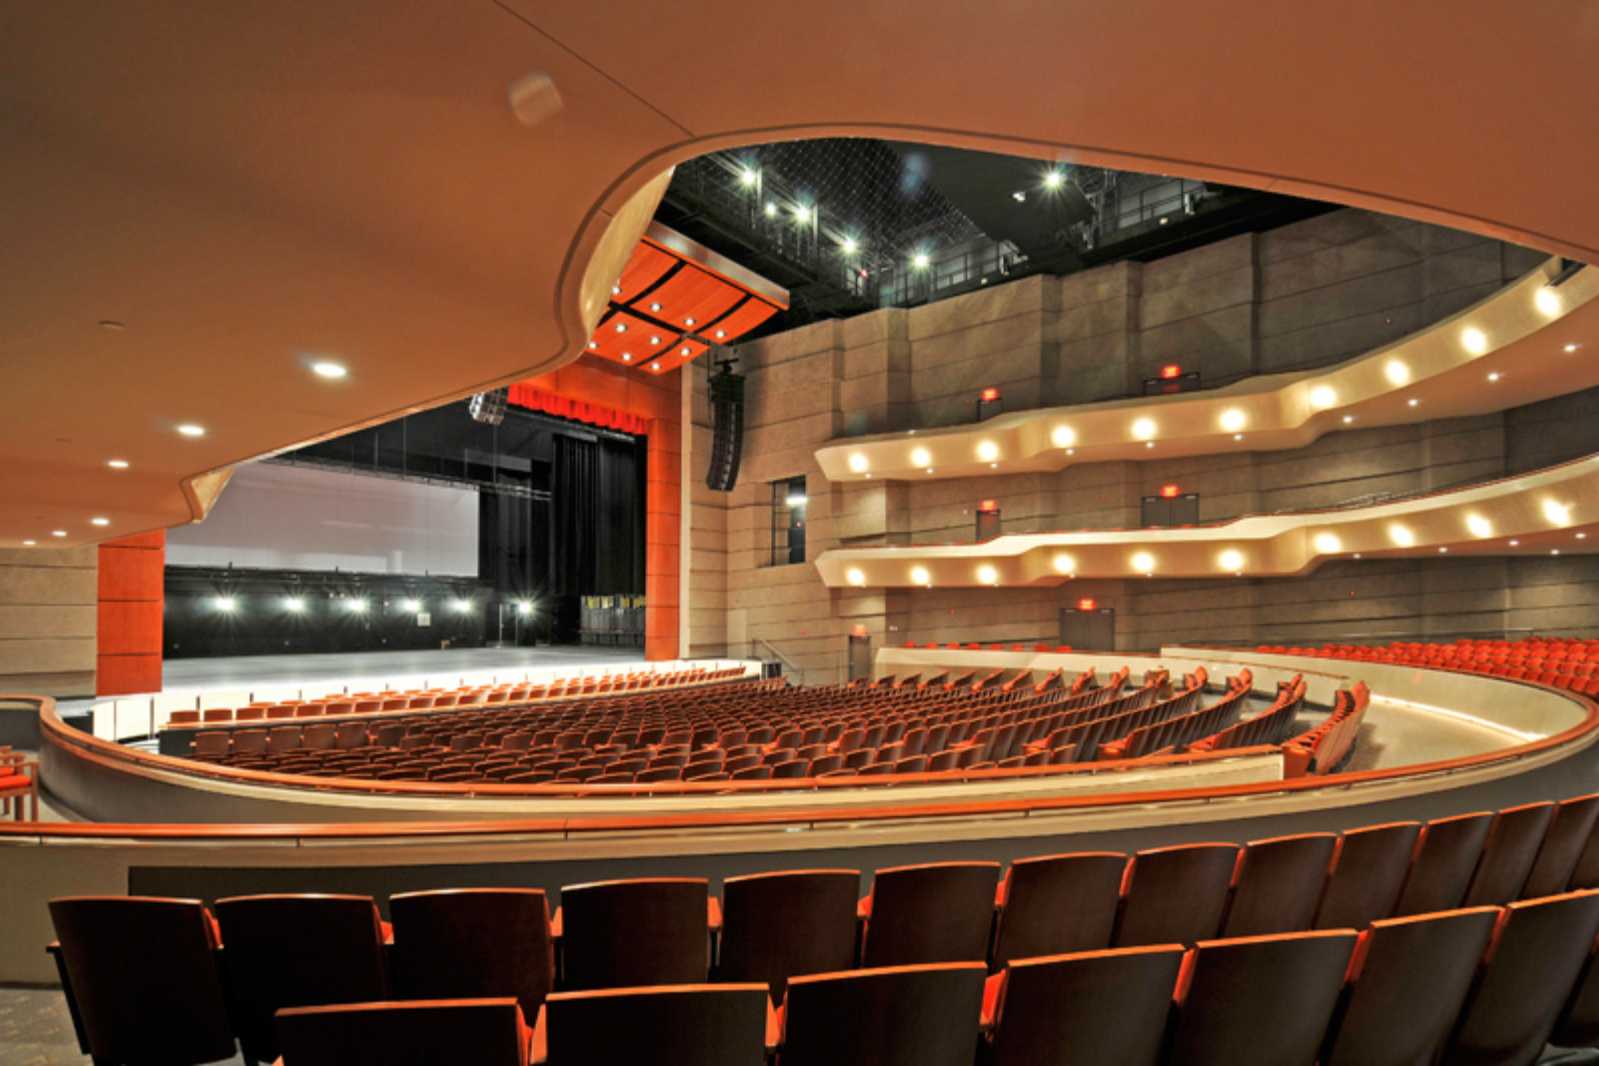 WAGNER NOEL PERFORMING ARTS CENTER BY BOORA ARCHITECTS + RHOTENBERRY